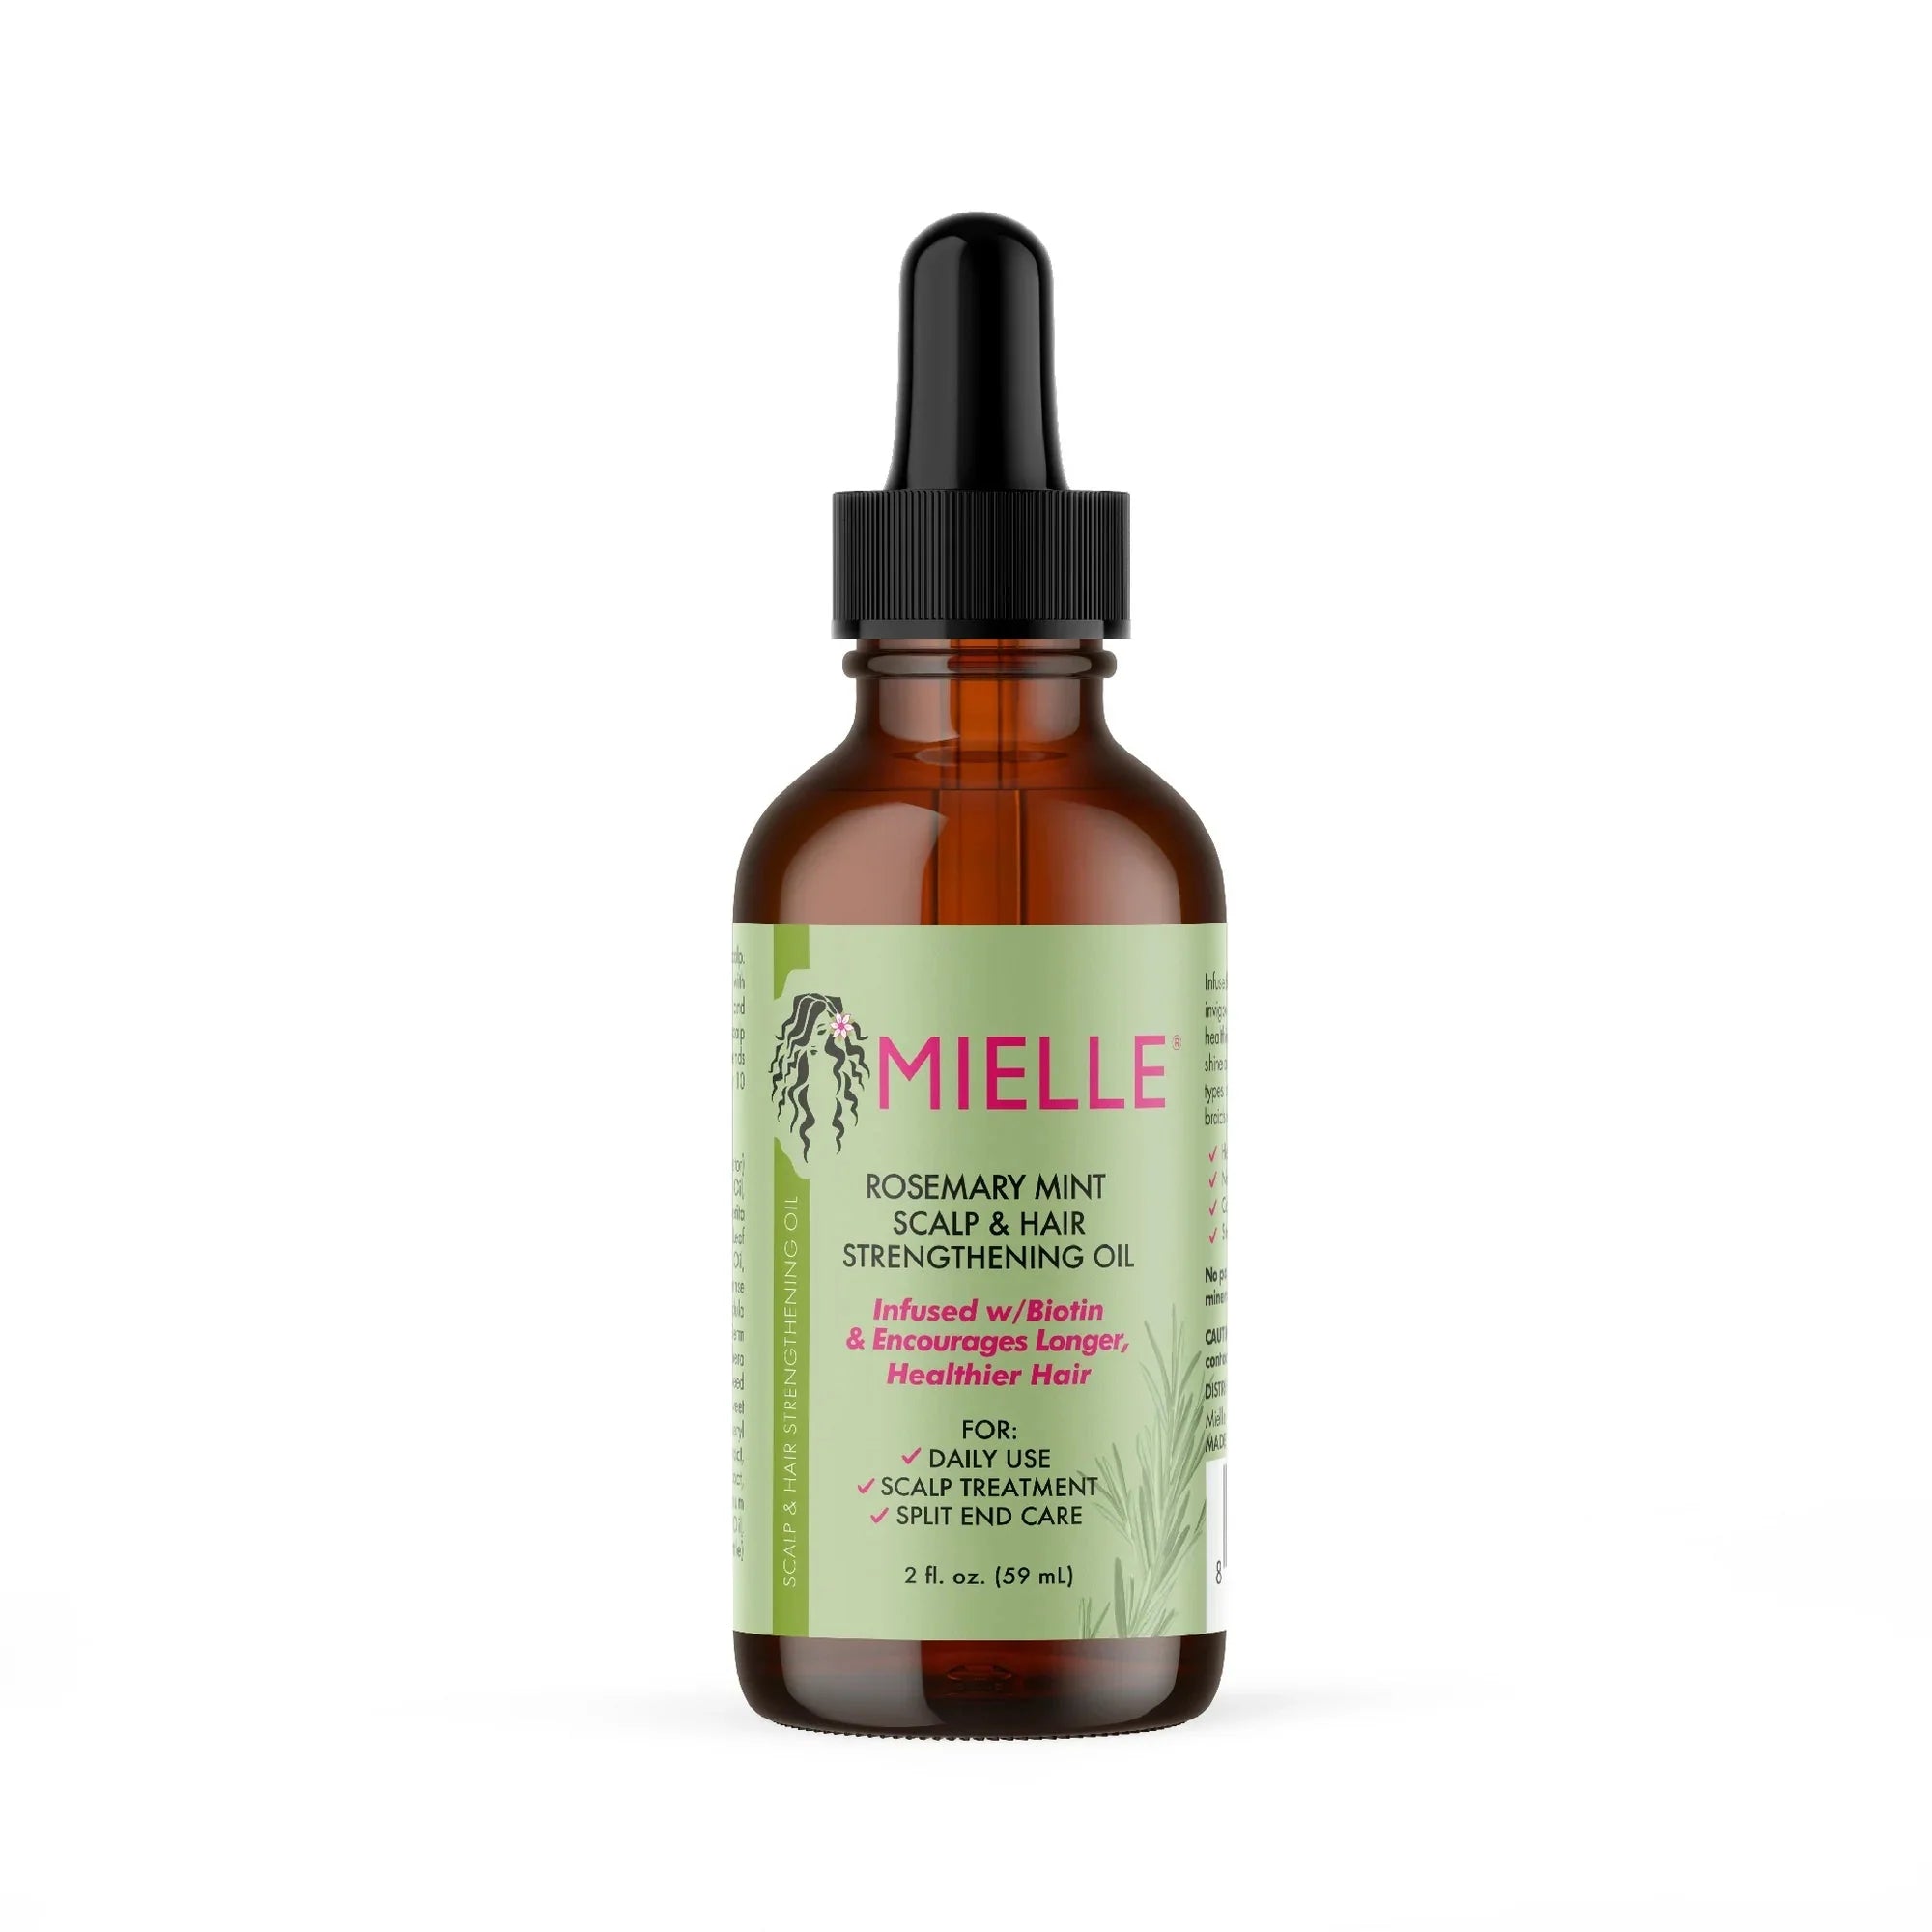 Wholesale prices with free shipping all over United States Mielle Rosemary Mint Scalp & Hair Strengthening Oil 2 oz - Steven Deals